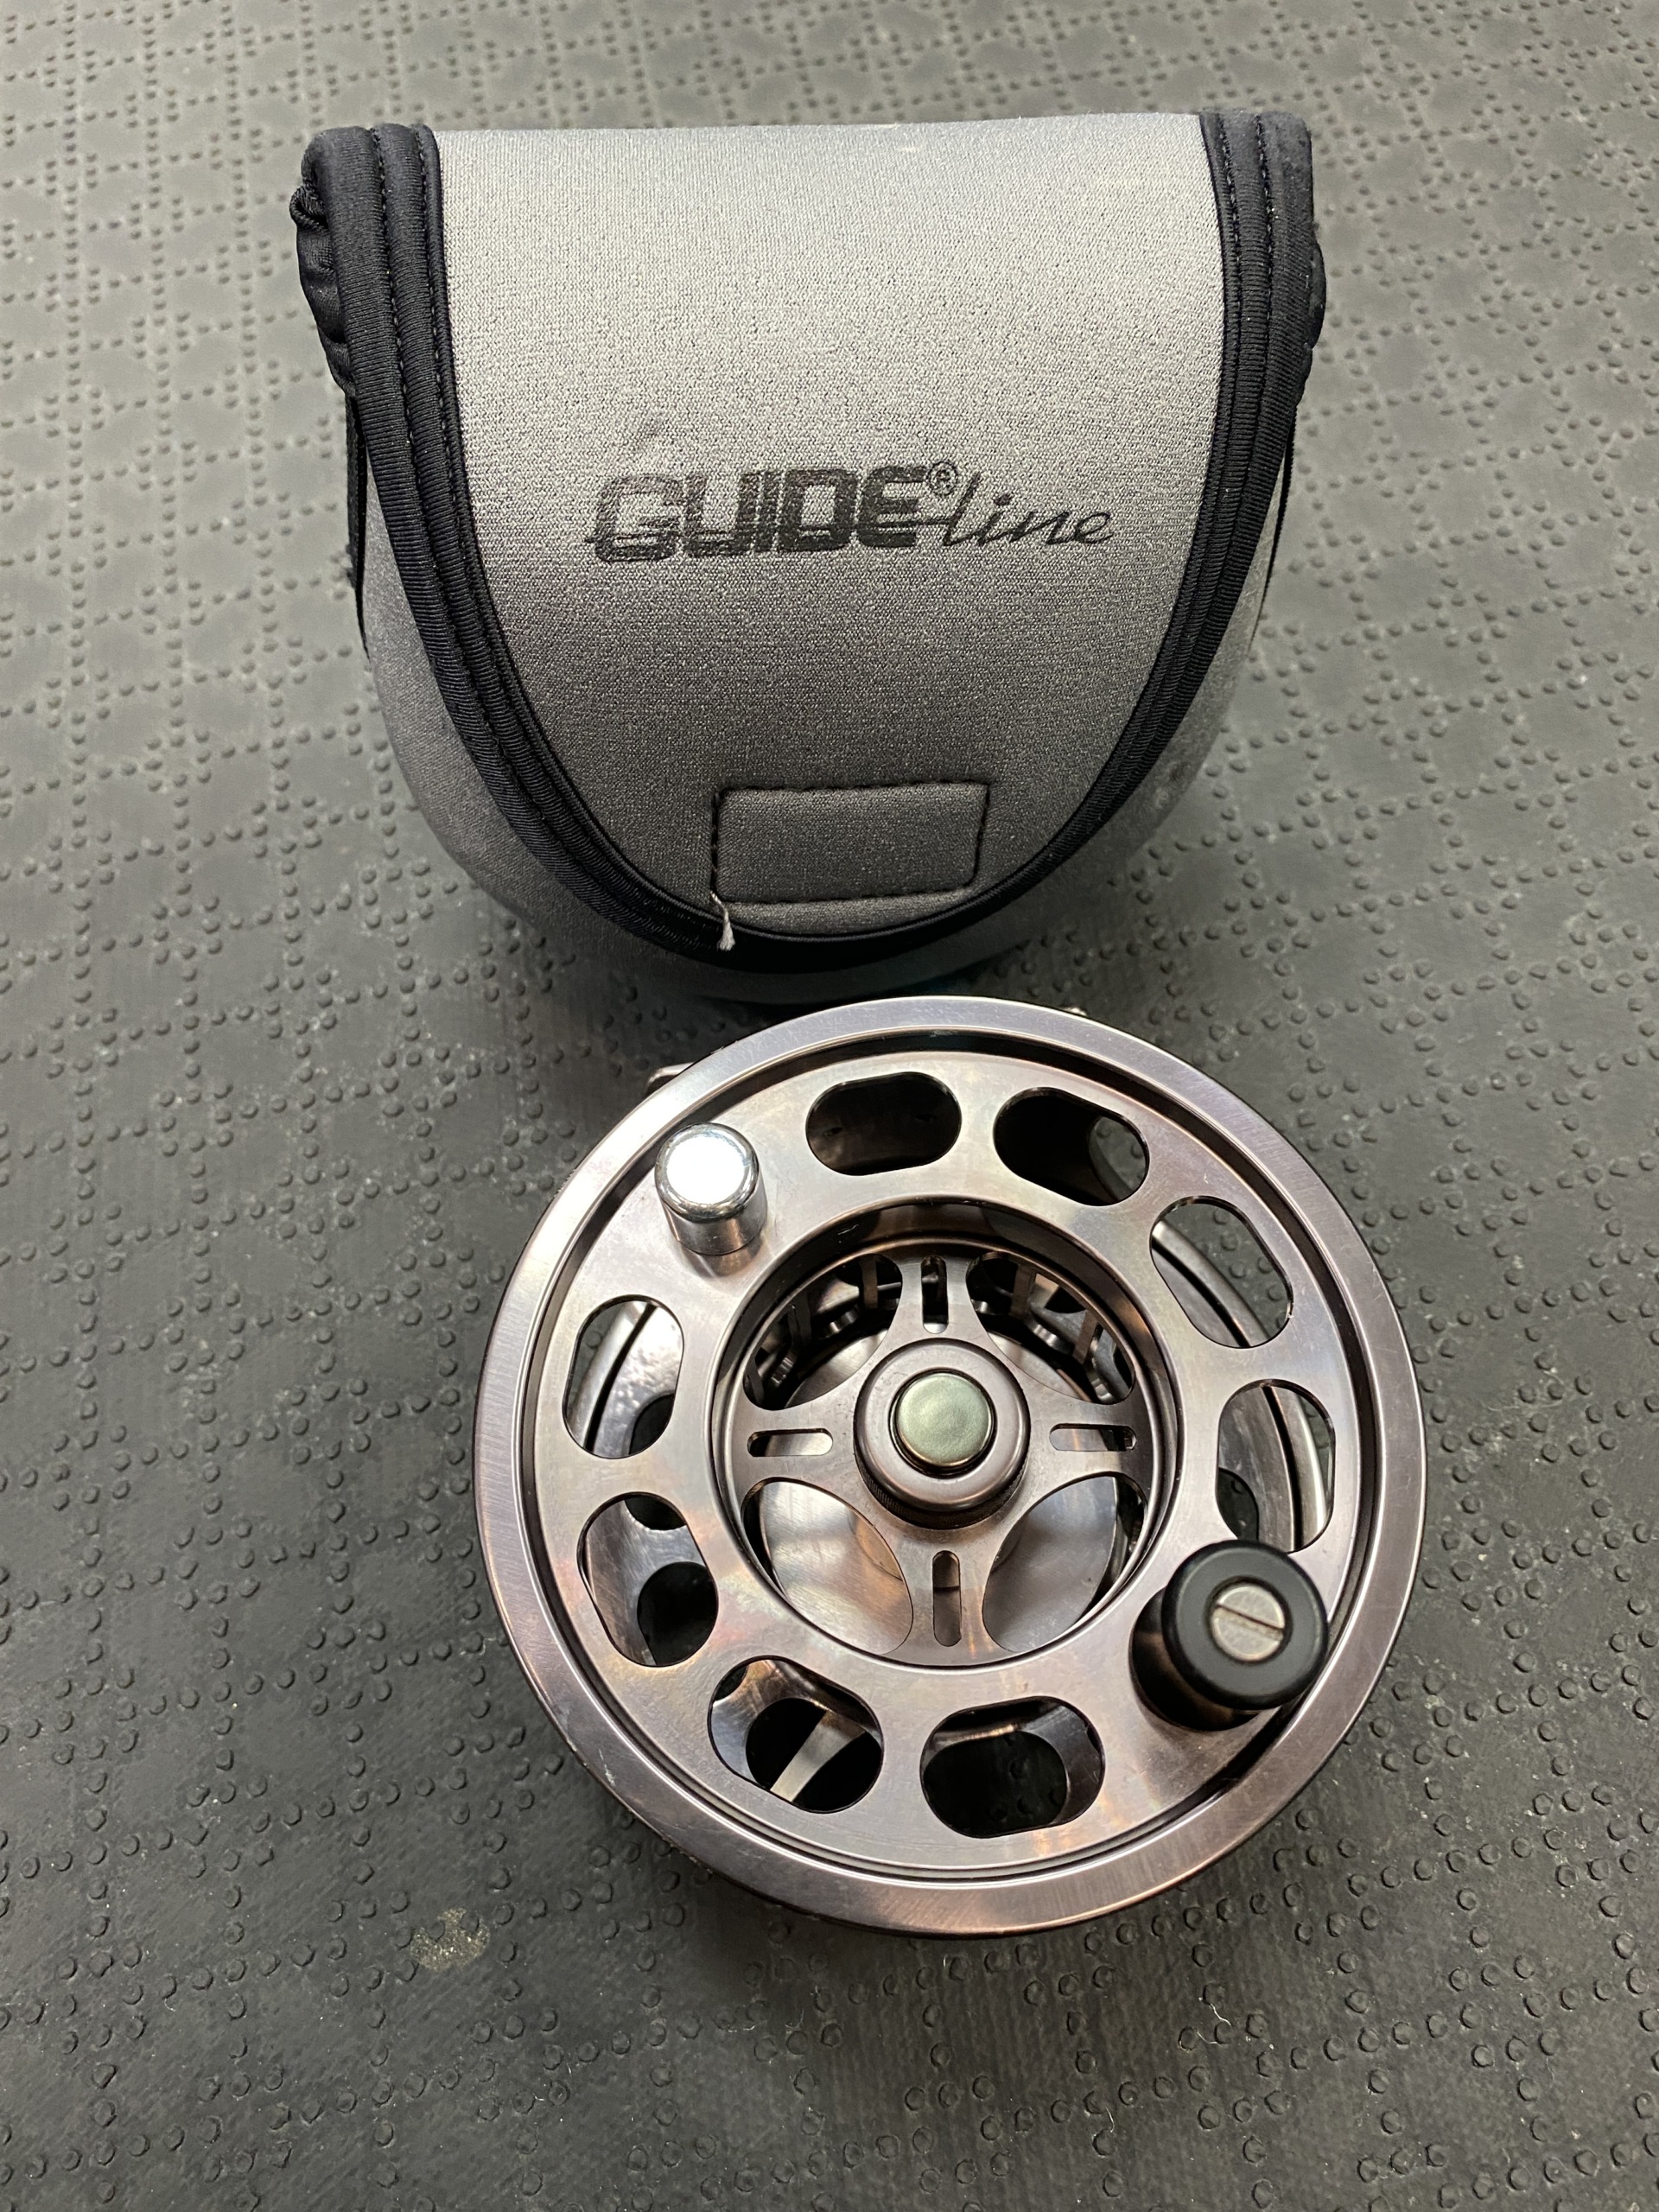 SOLD! – NEW PRICE! – Guideline Igma Fly / Spey / Salmon Fly Reel